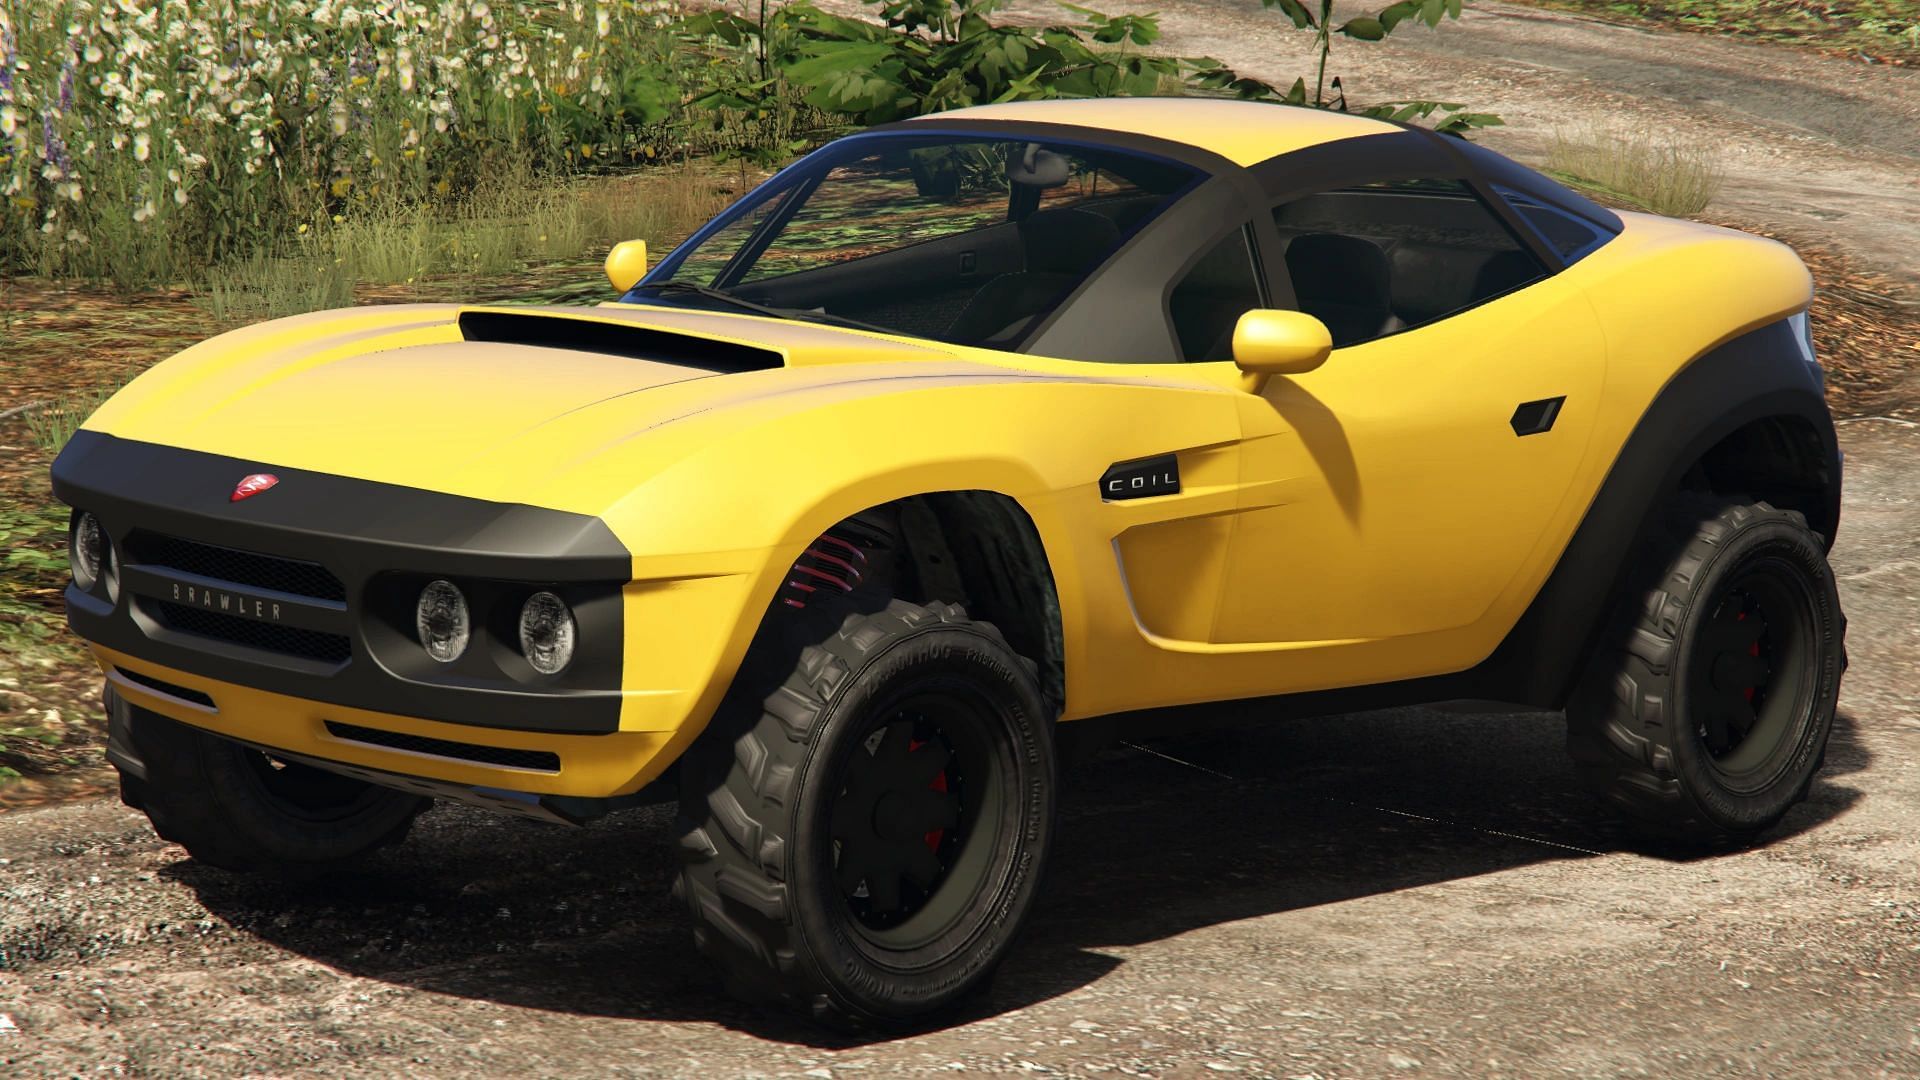 This off-road vehicle should return to the game (Image via WildBrick142/GTA Wiki)